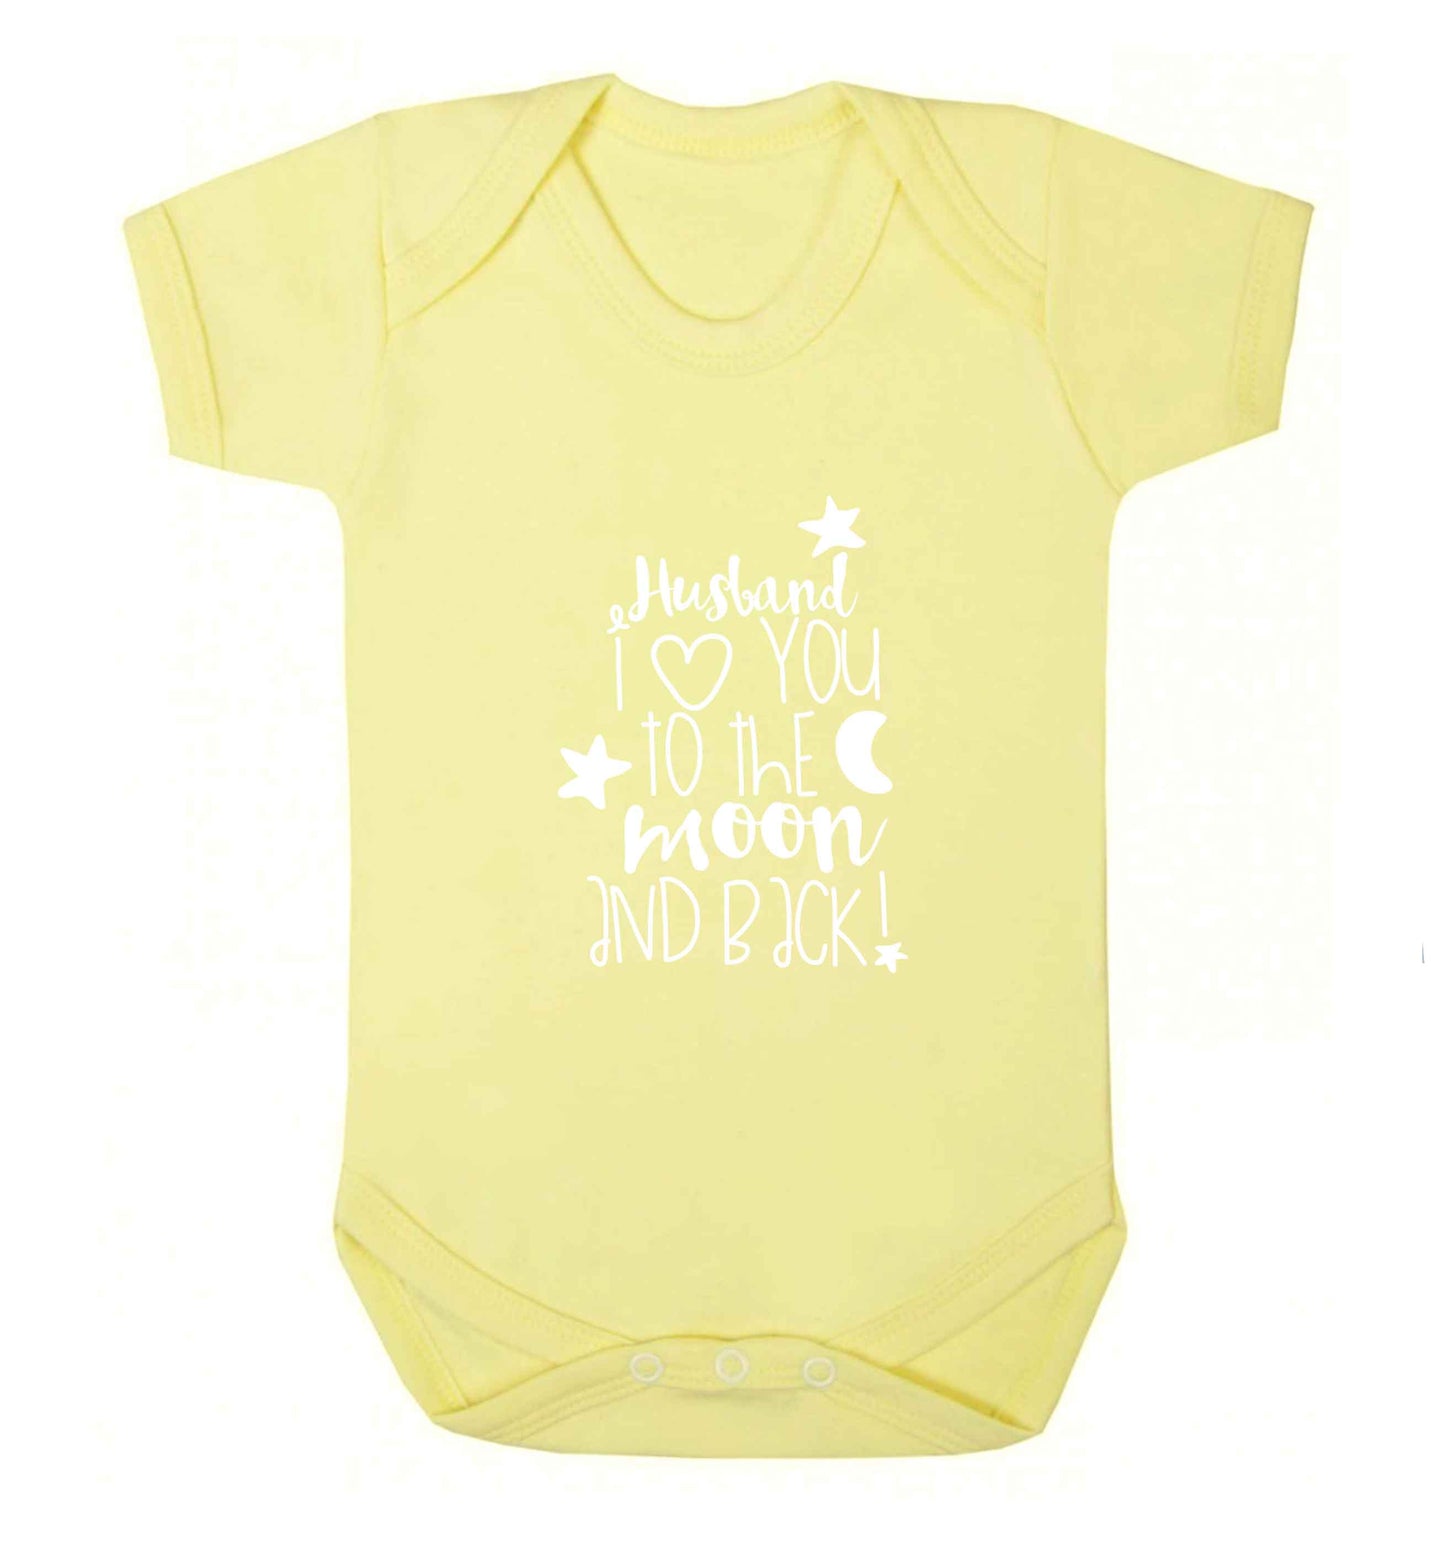 Husband I love you to the moon and back baby vest pale yellow 18-24 months